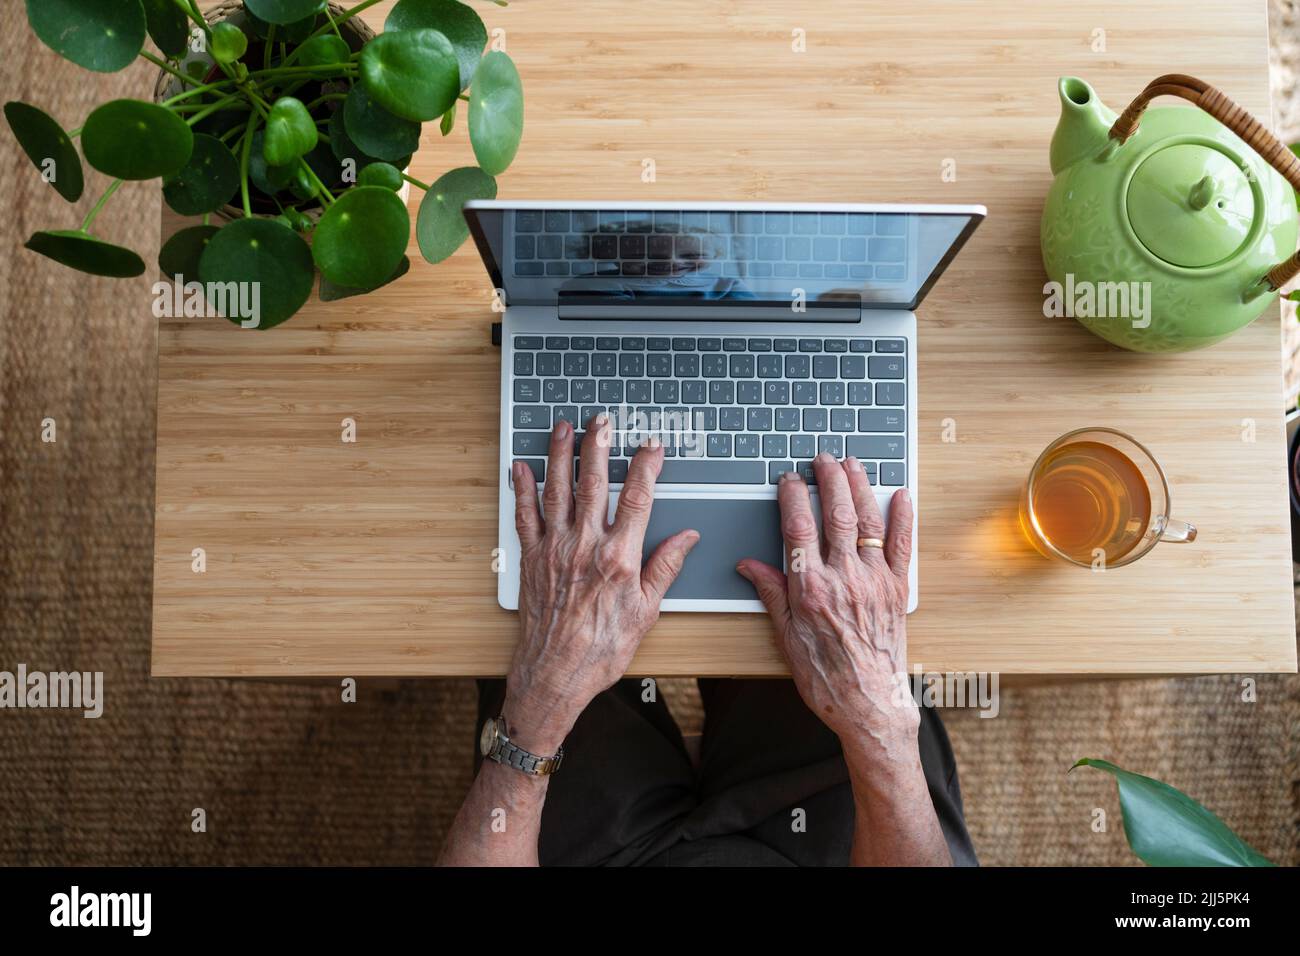 Hands of woman using laptop at home Stock Photo